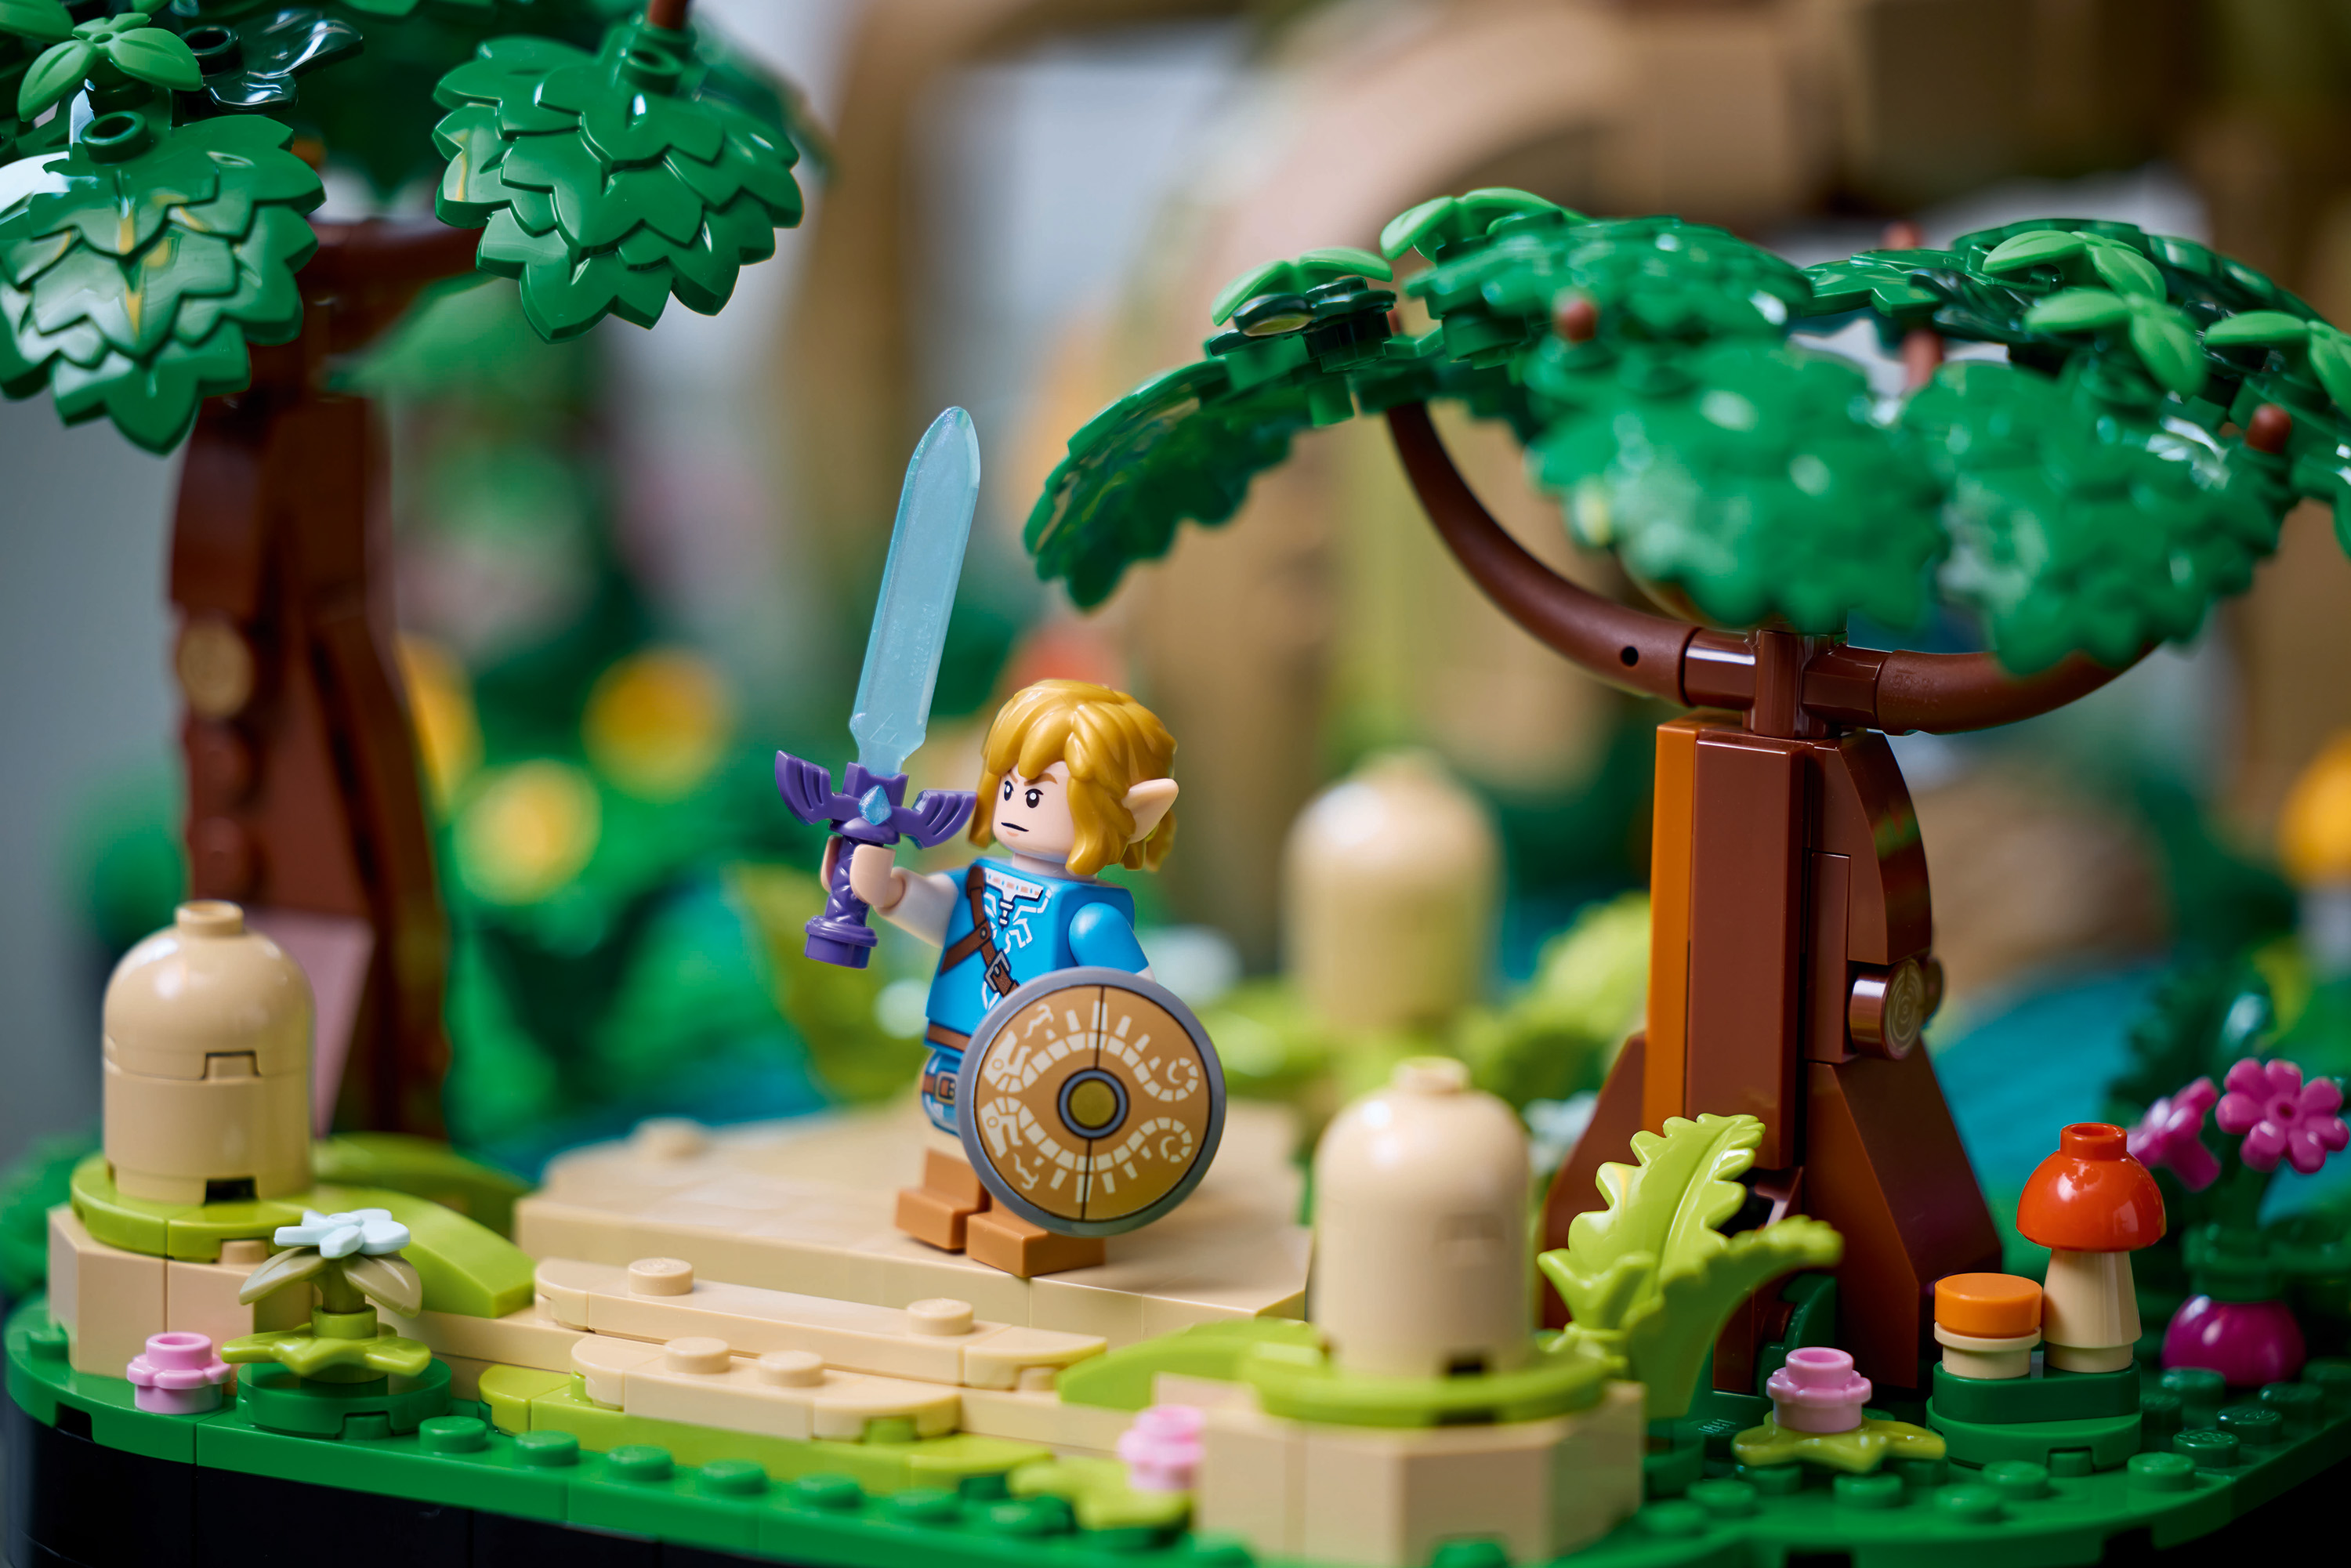 Lego minifig of Link stands in the Great Deku Tree with his sword up